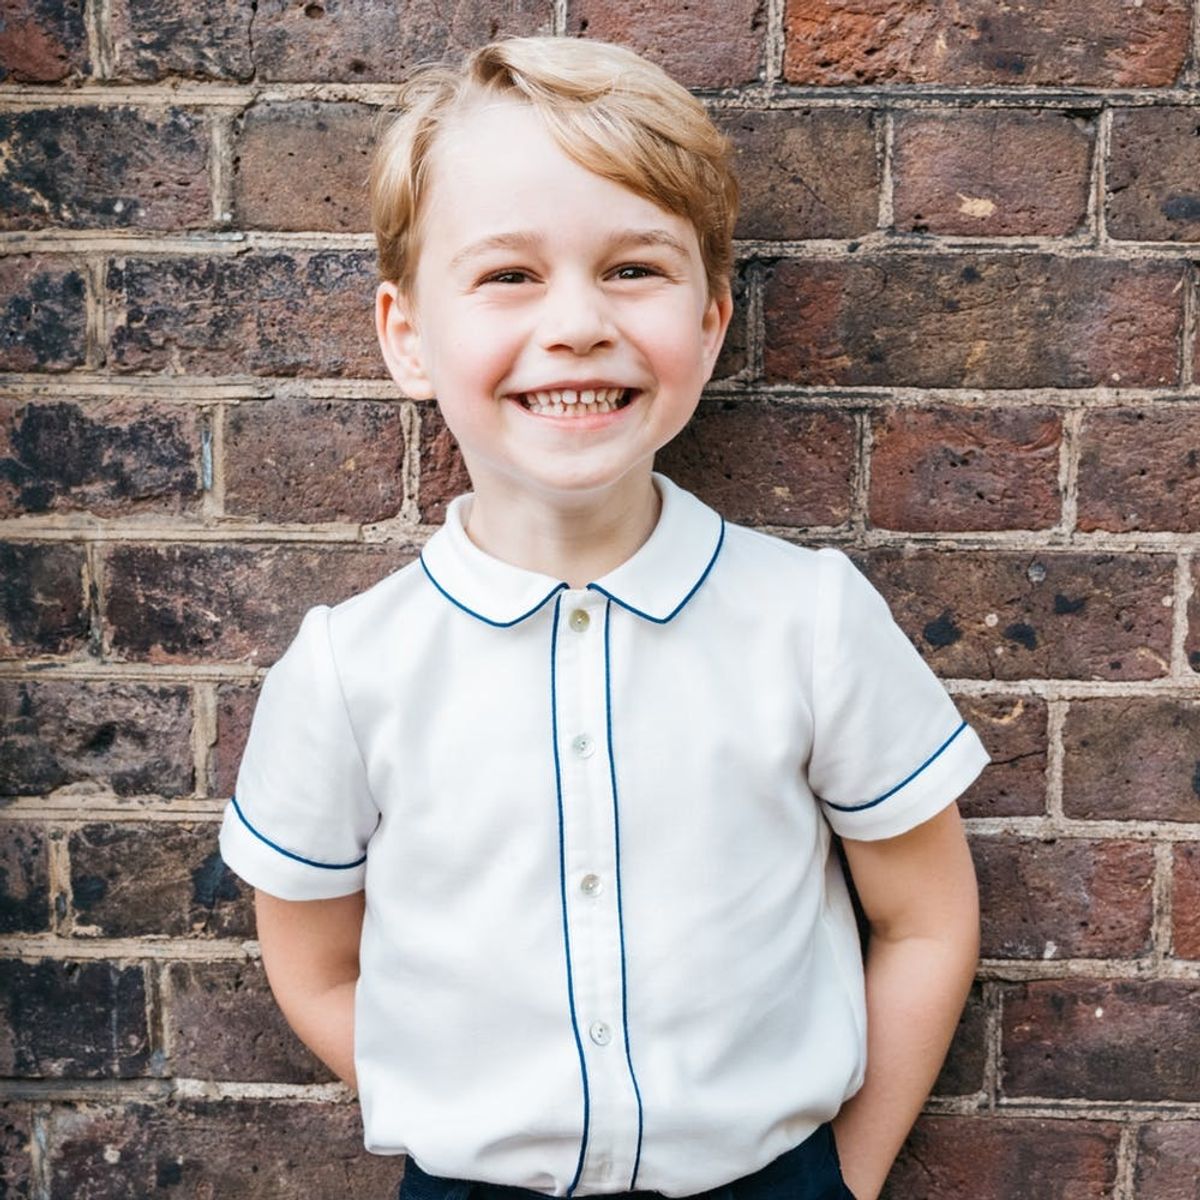 Prince George’s 5th Birthday Portrait Will Melt Your Heart